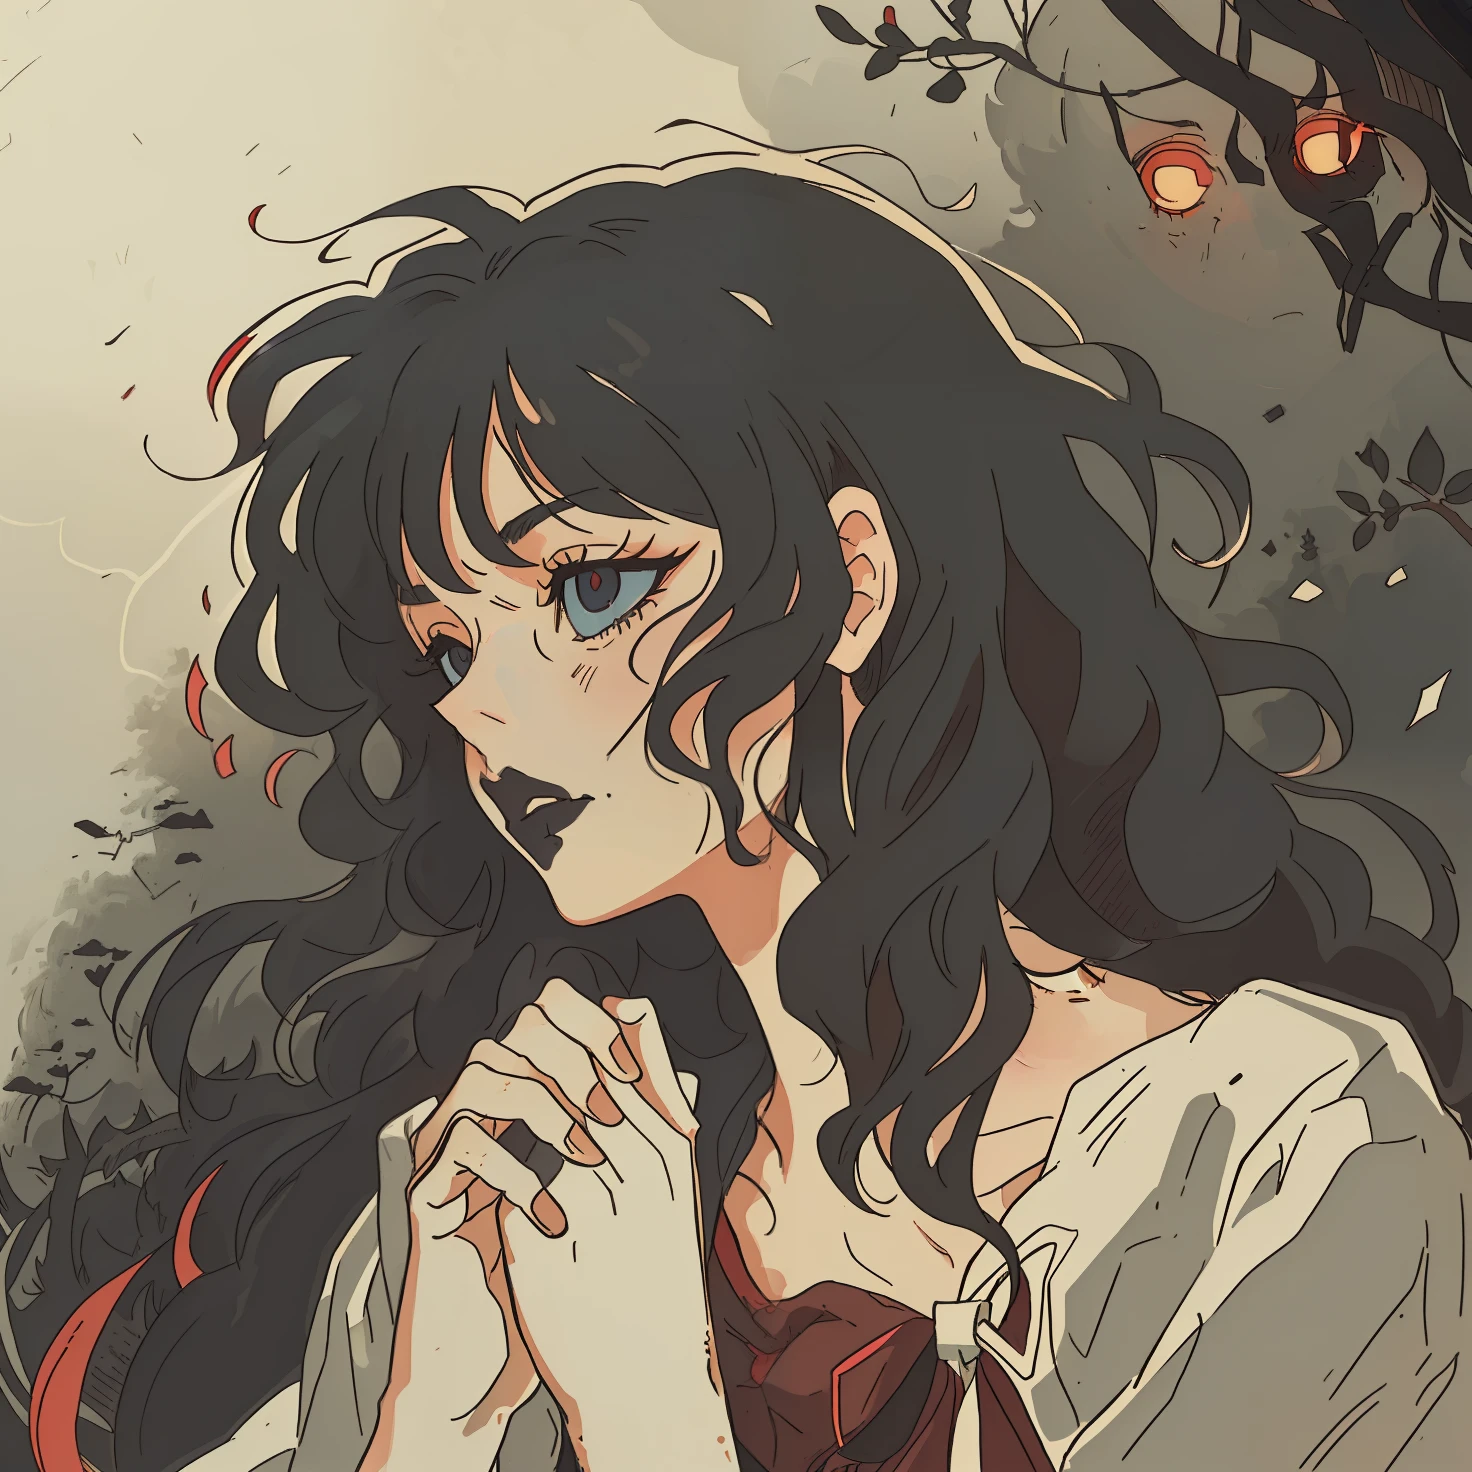 a close up of a person with long hair and a dark background, satoshi kon artstyle, with depressed eyes and curly hair, takato yamamoto aesthetic, with red backlight, by Satoshi Kon, horror wallpaper aesthetic, 8 0's horror anime, korean art nouveau anime, (dark:1.5), forest background, sketch